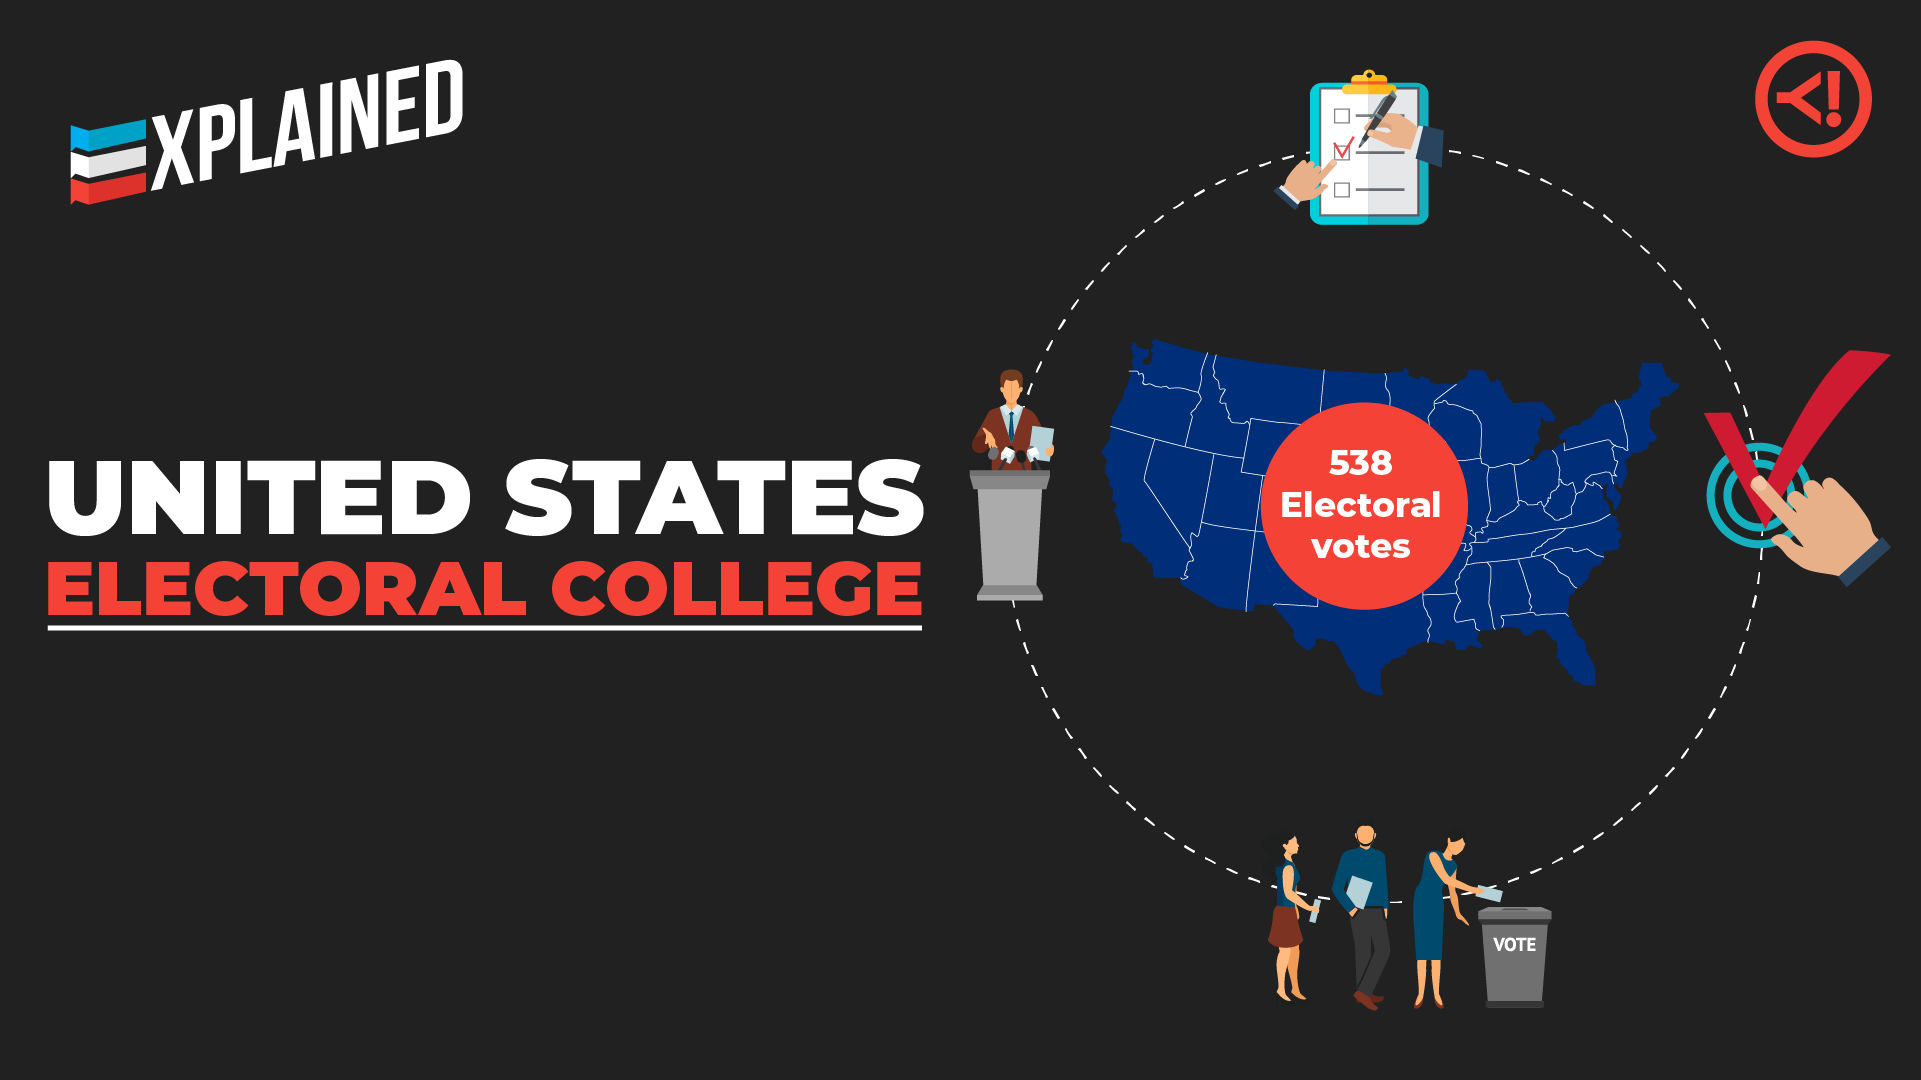 Explained: Electoral College that elects US President